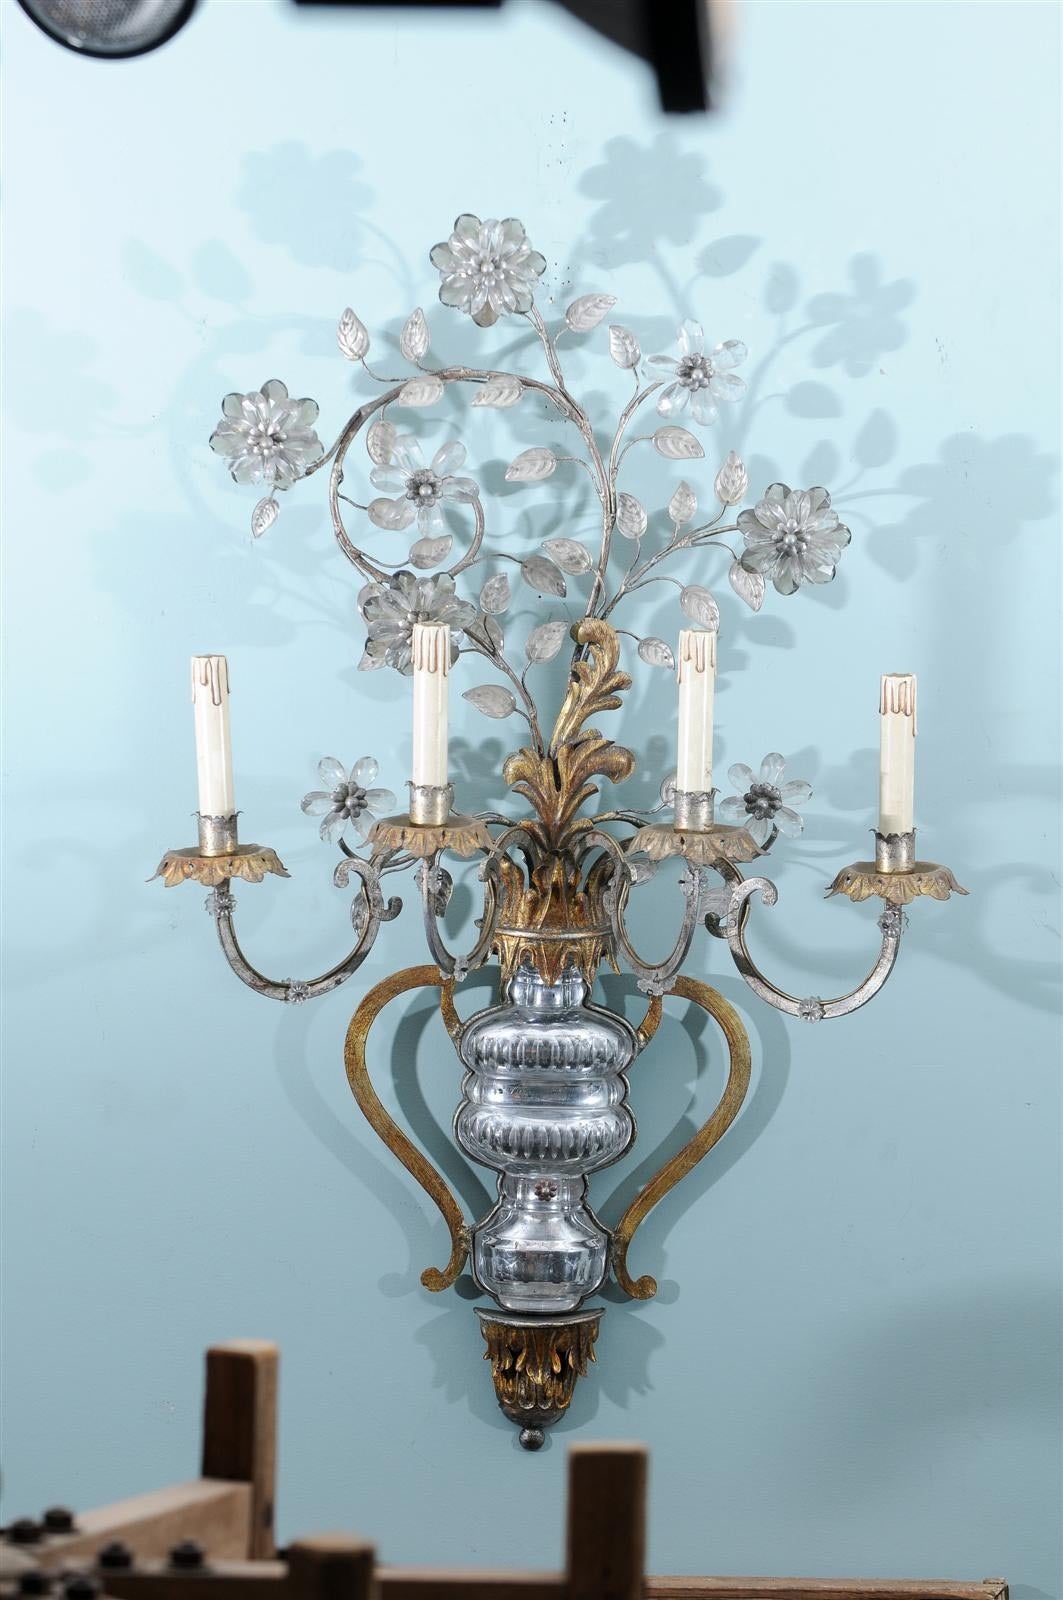 An Italian exquisite single four-arm sconce with mercury glass urn decorated with bouquet of flowers, from the early 20th century. 

In all of the pictures of this single sconce, including the main picture, the flowers look blue because of the